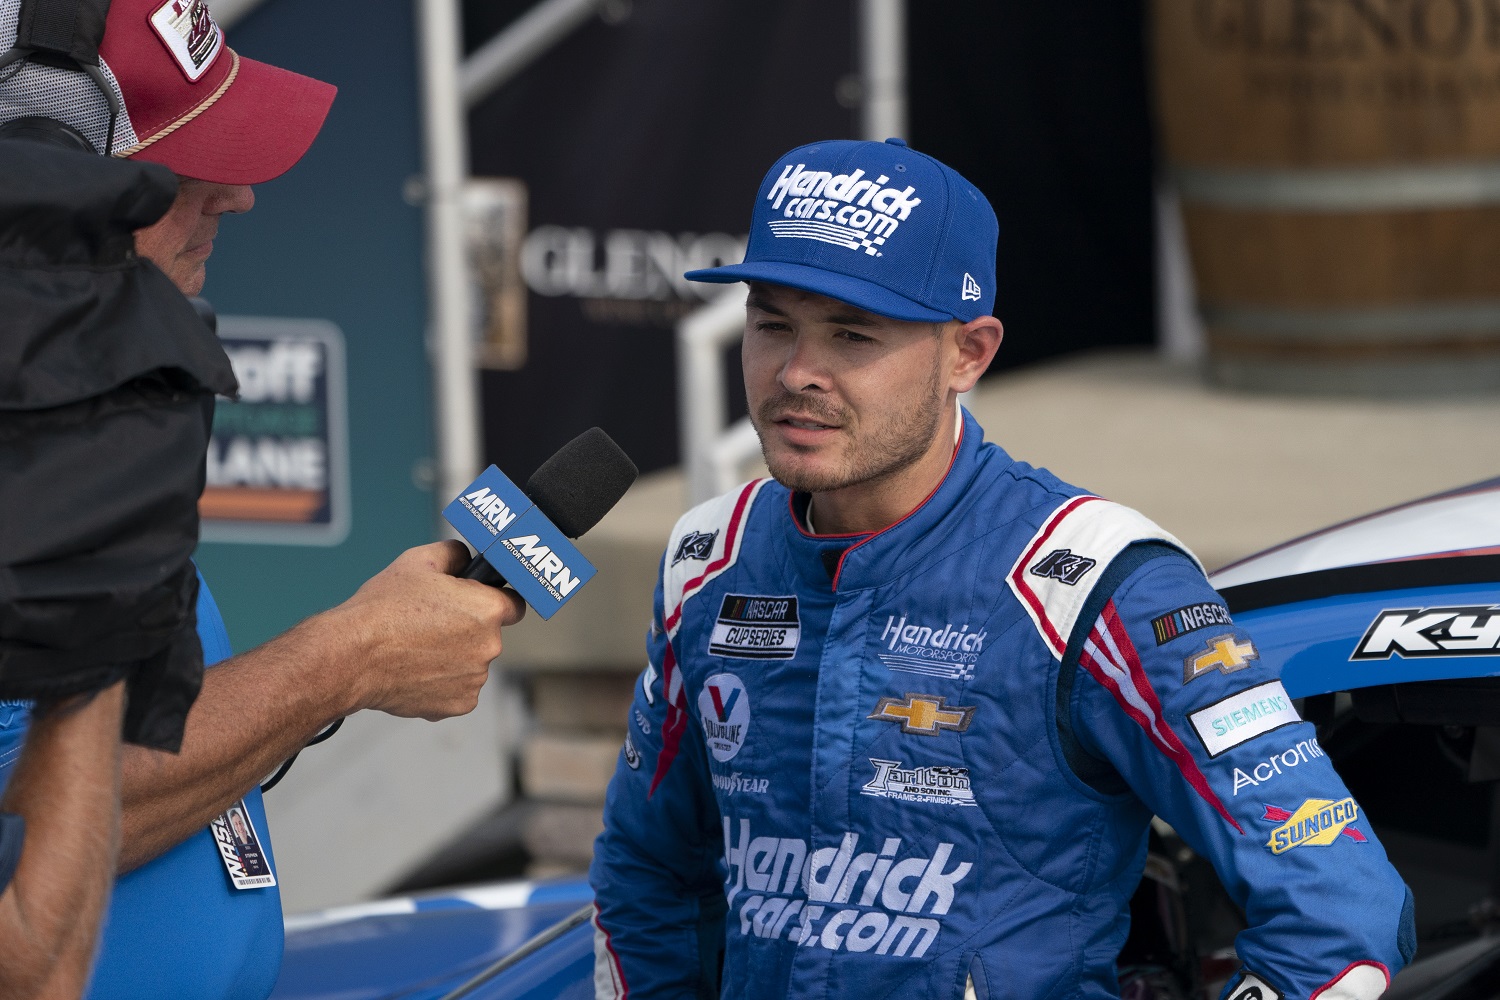 Kyle Larson gives an interview in victory lane after winning the NASCAR Cup Series Go Bowling at The Glen race on Aug. 8, 2021. | Gregory Fisher/Icon Sportswire via Getty Images